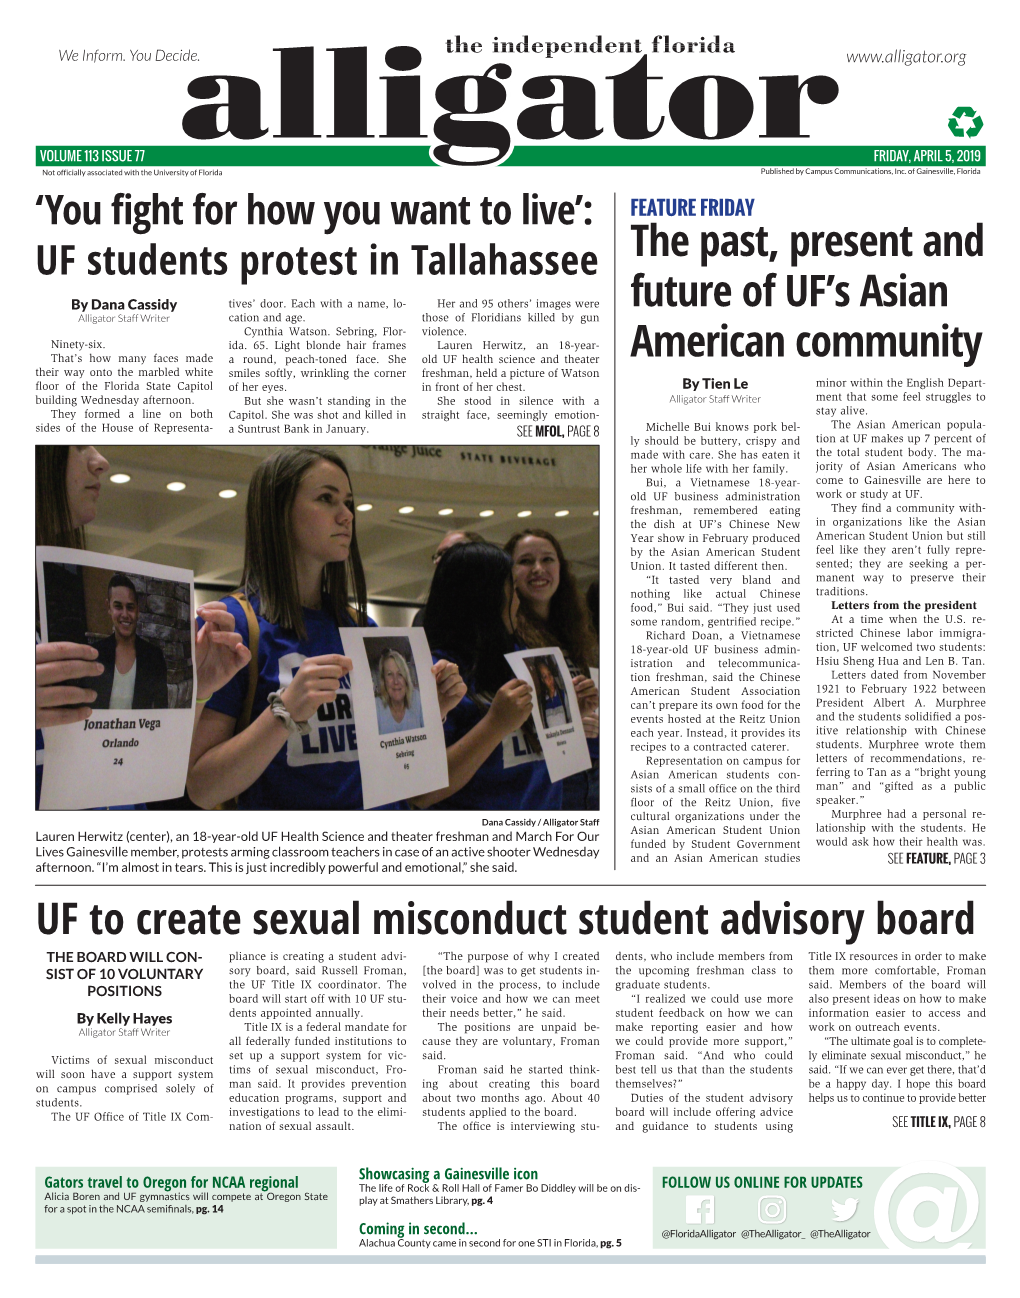 The Past, Present and Future of UF's Asian American Community UF to Create Sexual Misconduct Student Advisory Board